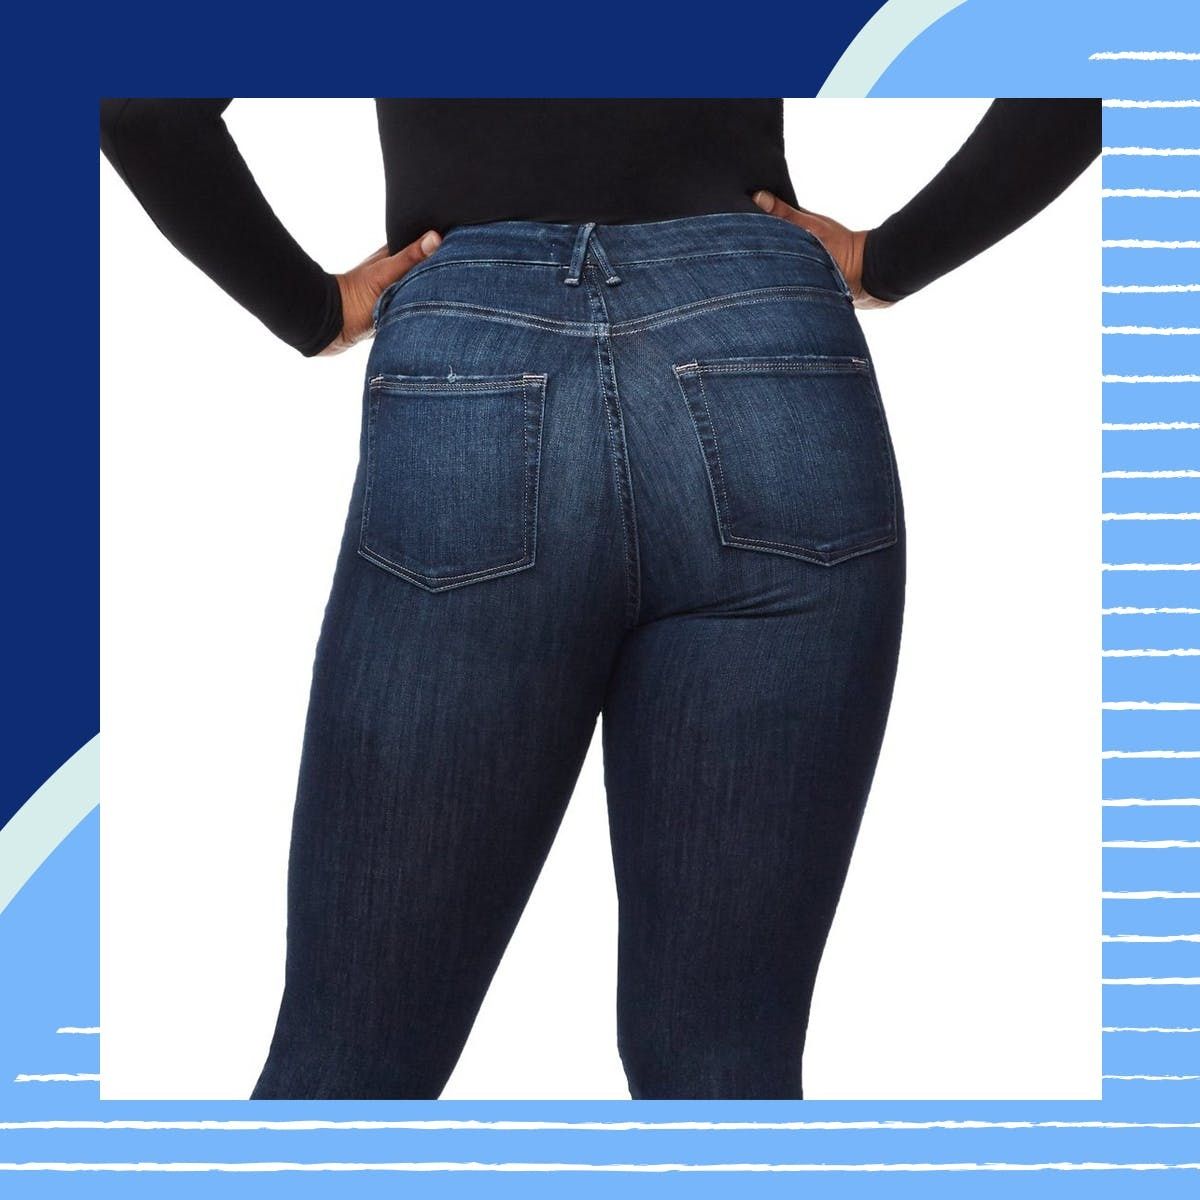 18 Size-Inclusive Denim Styles That Flatter the Booty